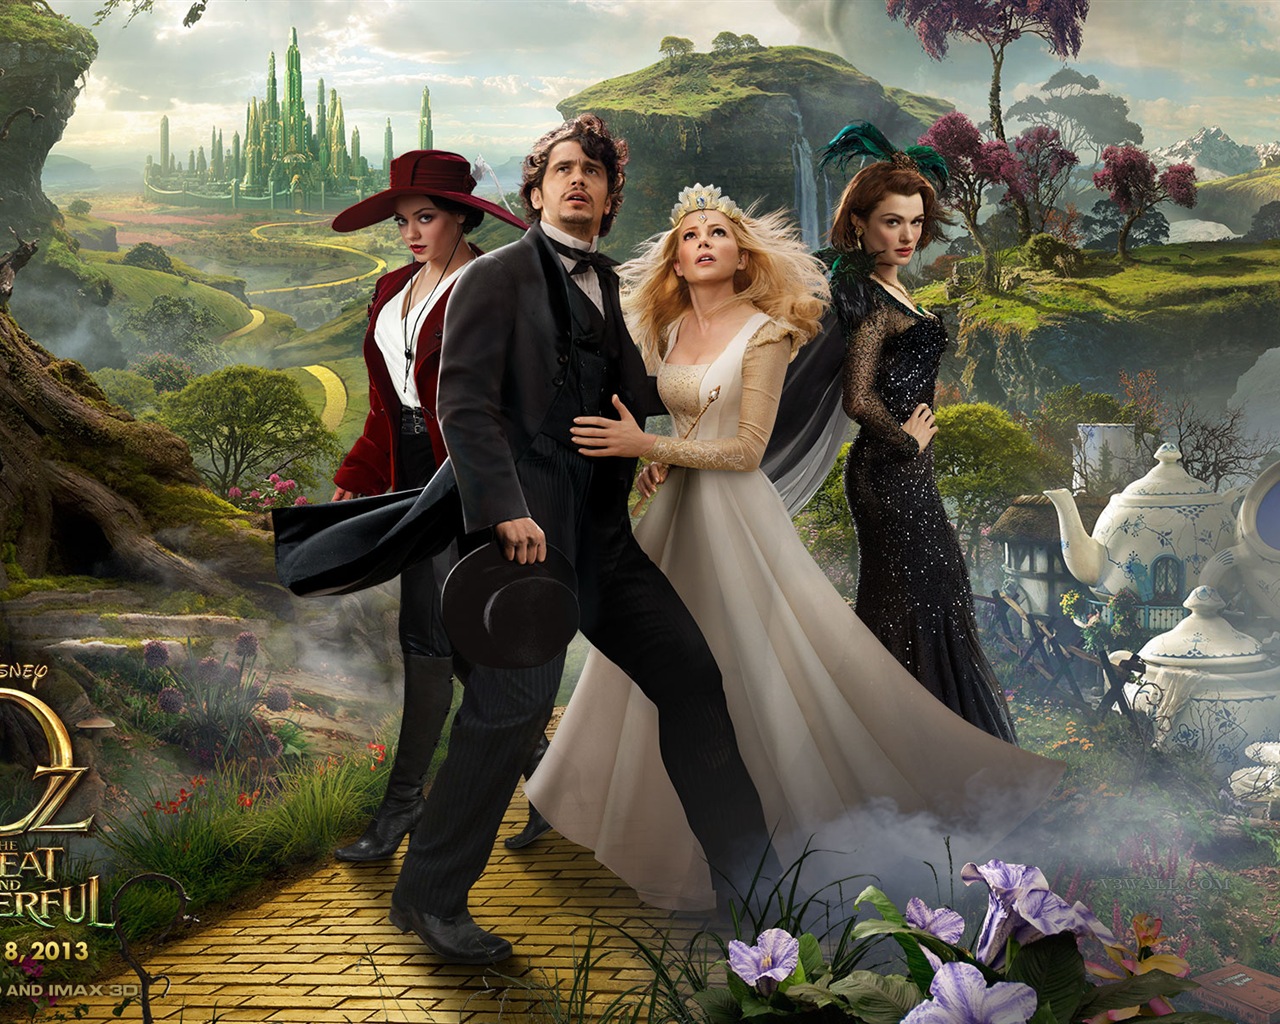 Oz The Great and Powerful 绿野仙踪 高清壁纸1 - 1280x1024